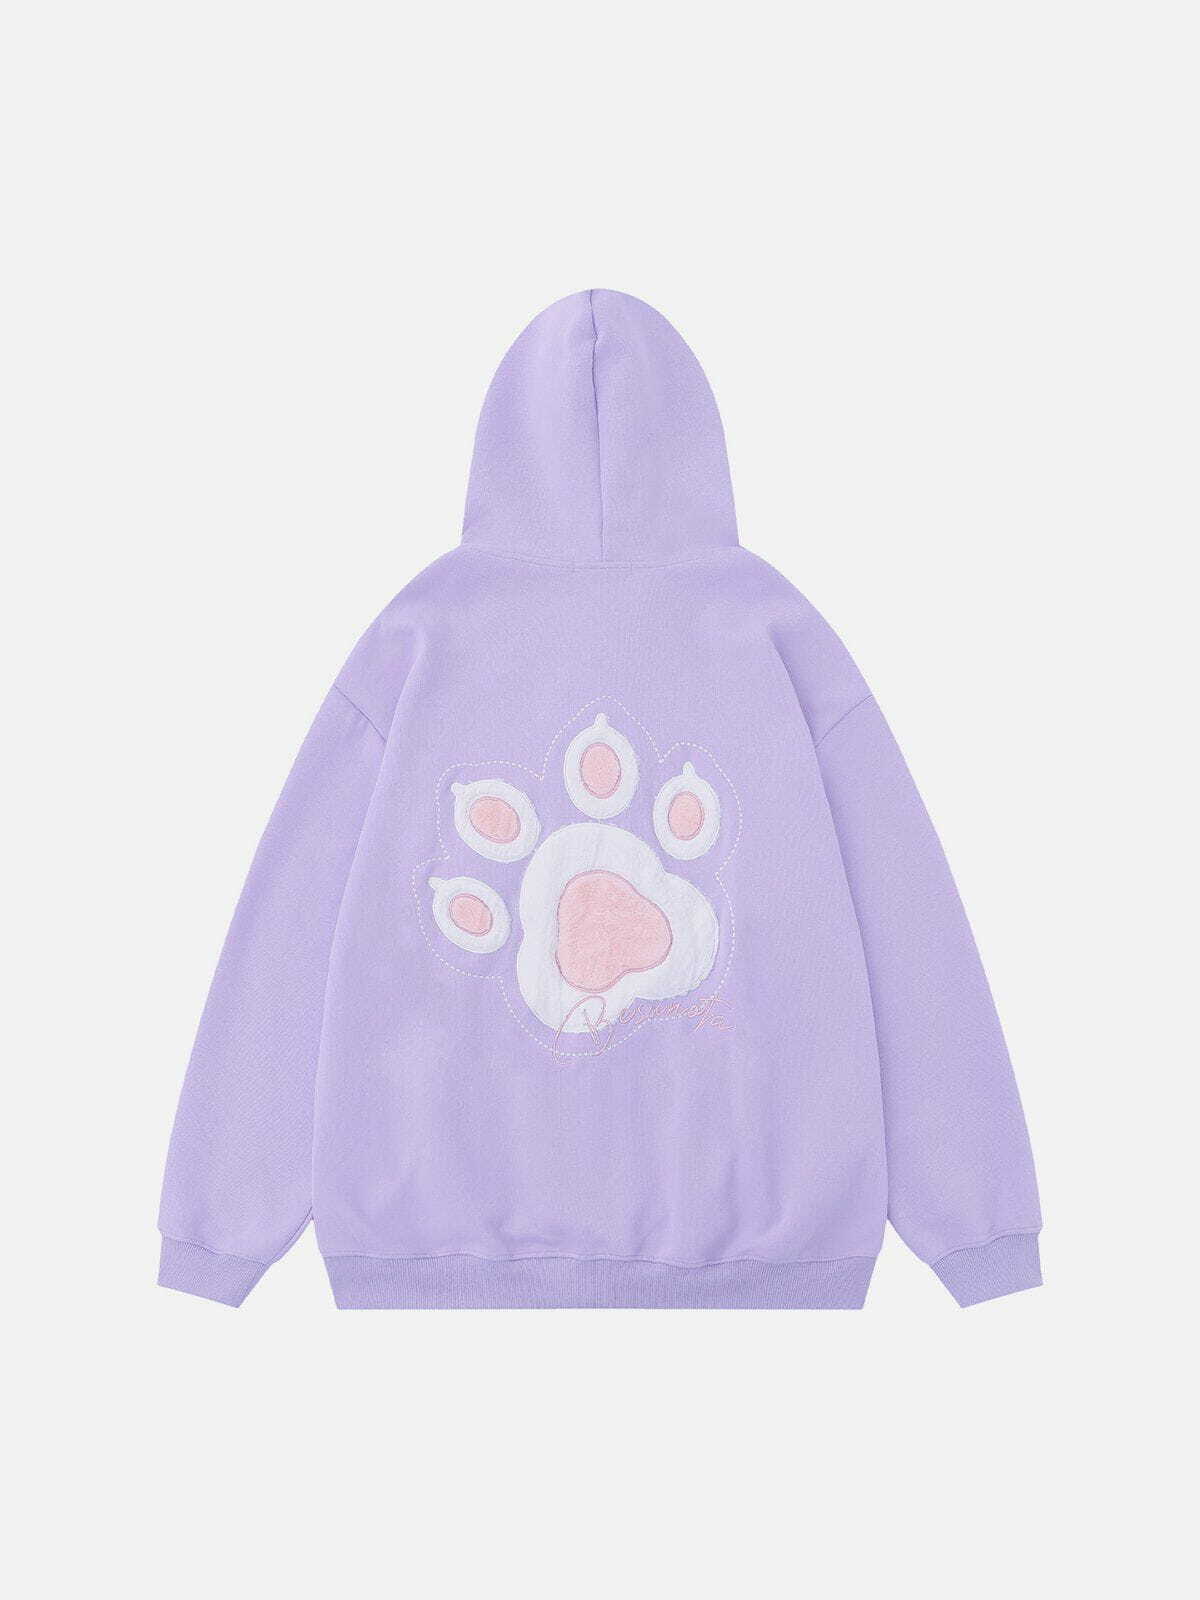 retro cat paw embroidery hoodie urban chic 3681